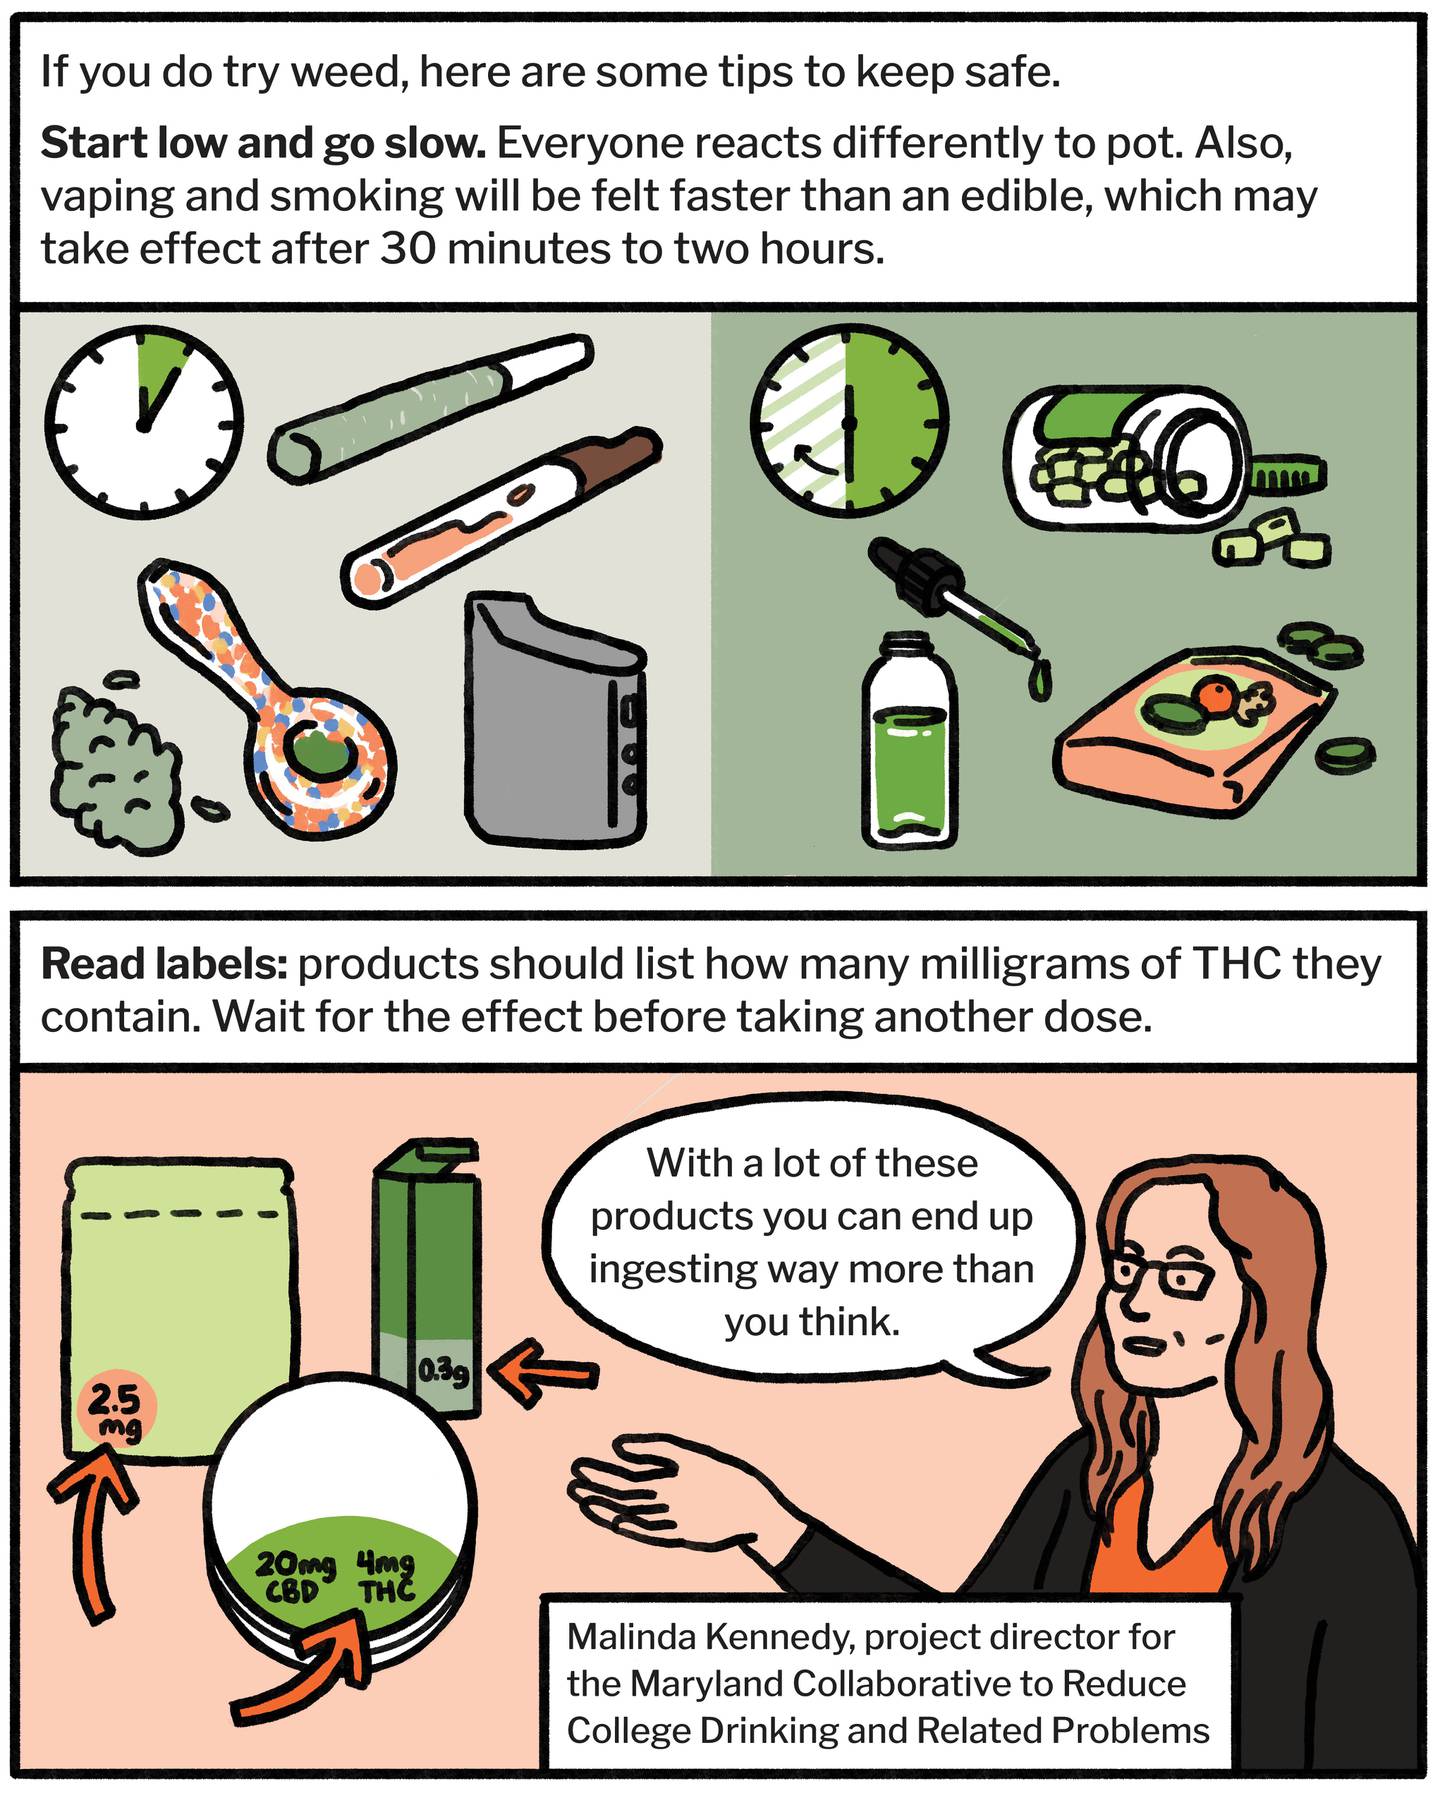 If you do try weed, here are some tips to keep safe. Start low and go slow. Everyone reacts differently to pot. Also, vaping or smoking will be felt faster than an edible, which may take effect after 30 minutes to two hours. Read labels: products should list how many milligrams of THC they contain. Wait for the effect before taking another dose. Malinda Kennedy, project director for the Maryland Collaborative to Reduce College Drinking and Related Problems says: With a lot of these products you can end up ingesting way more than you think.